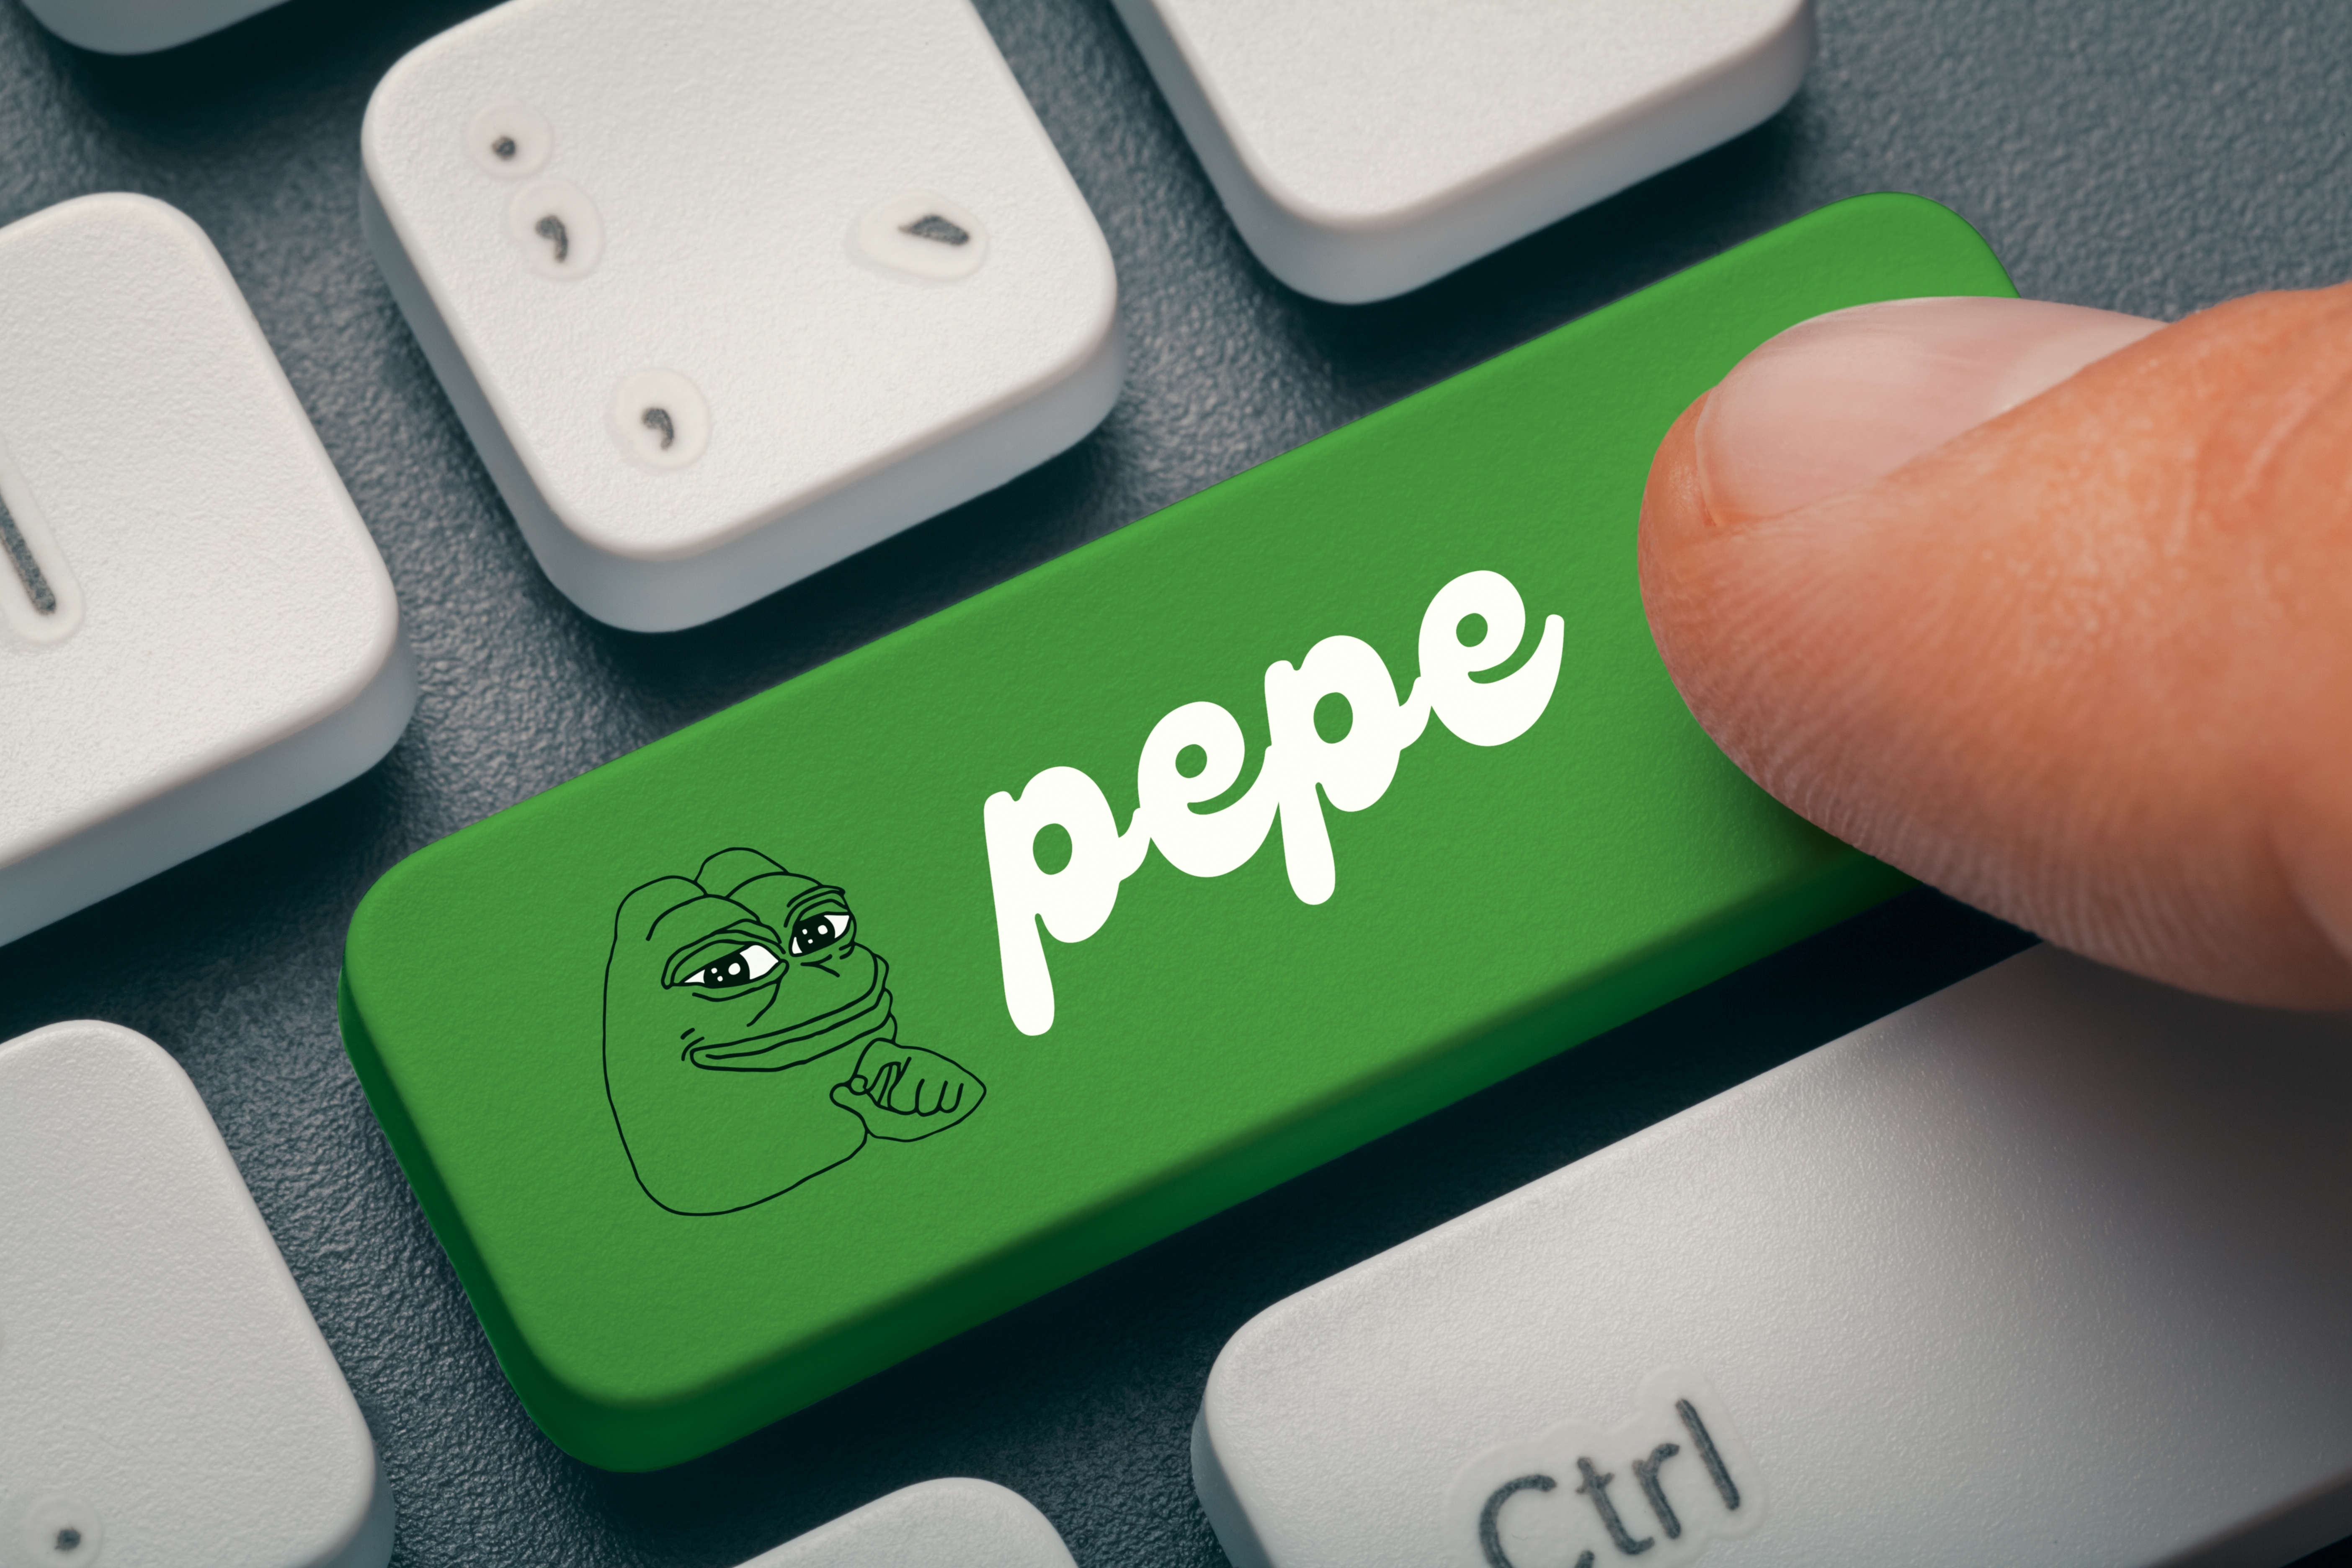 PEPE Chart Heats Up: Crypto Analyst Calls It One Of The Most Attractive